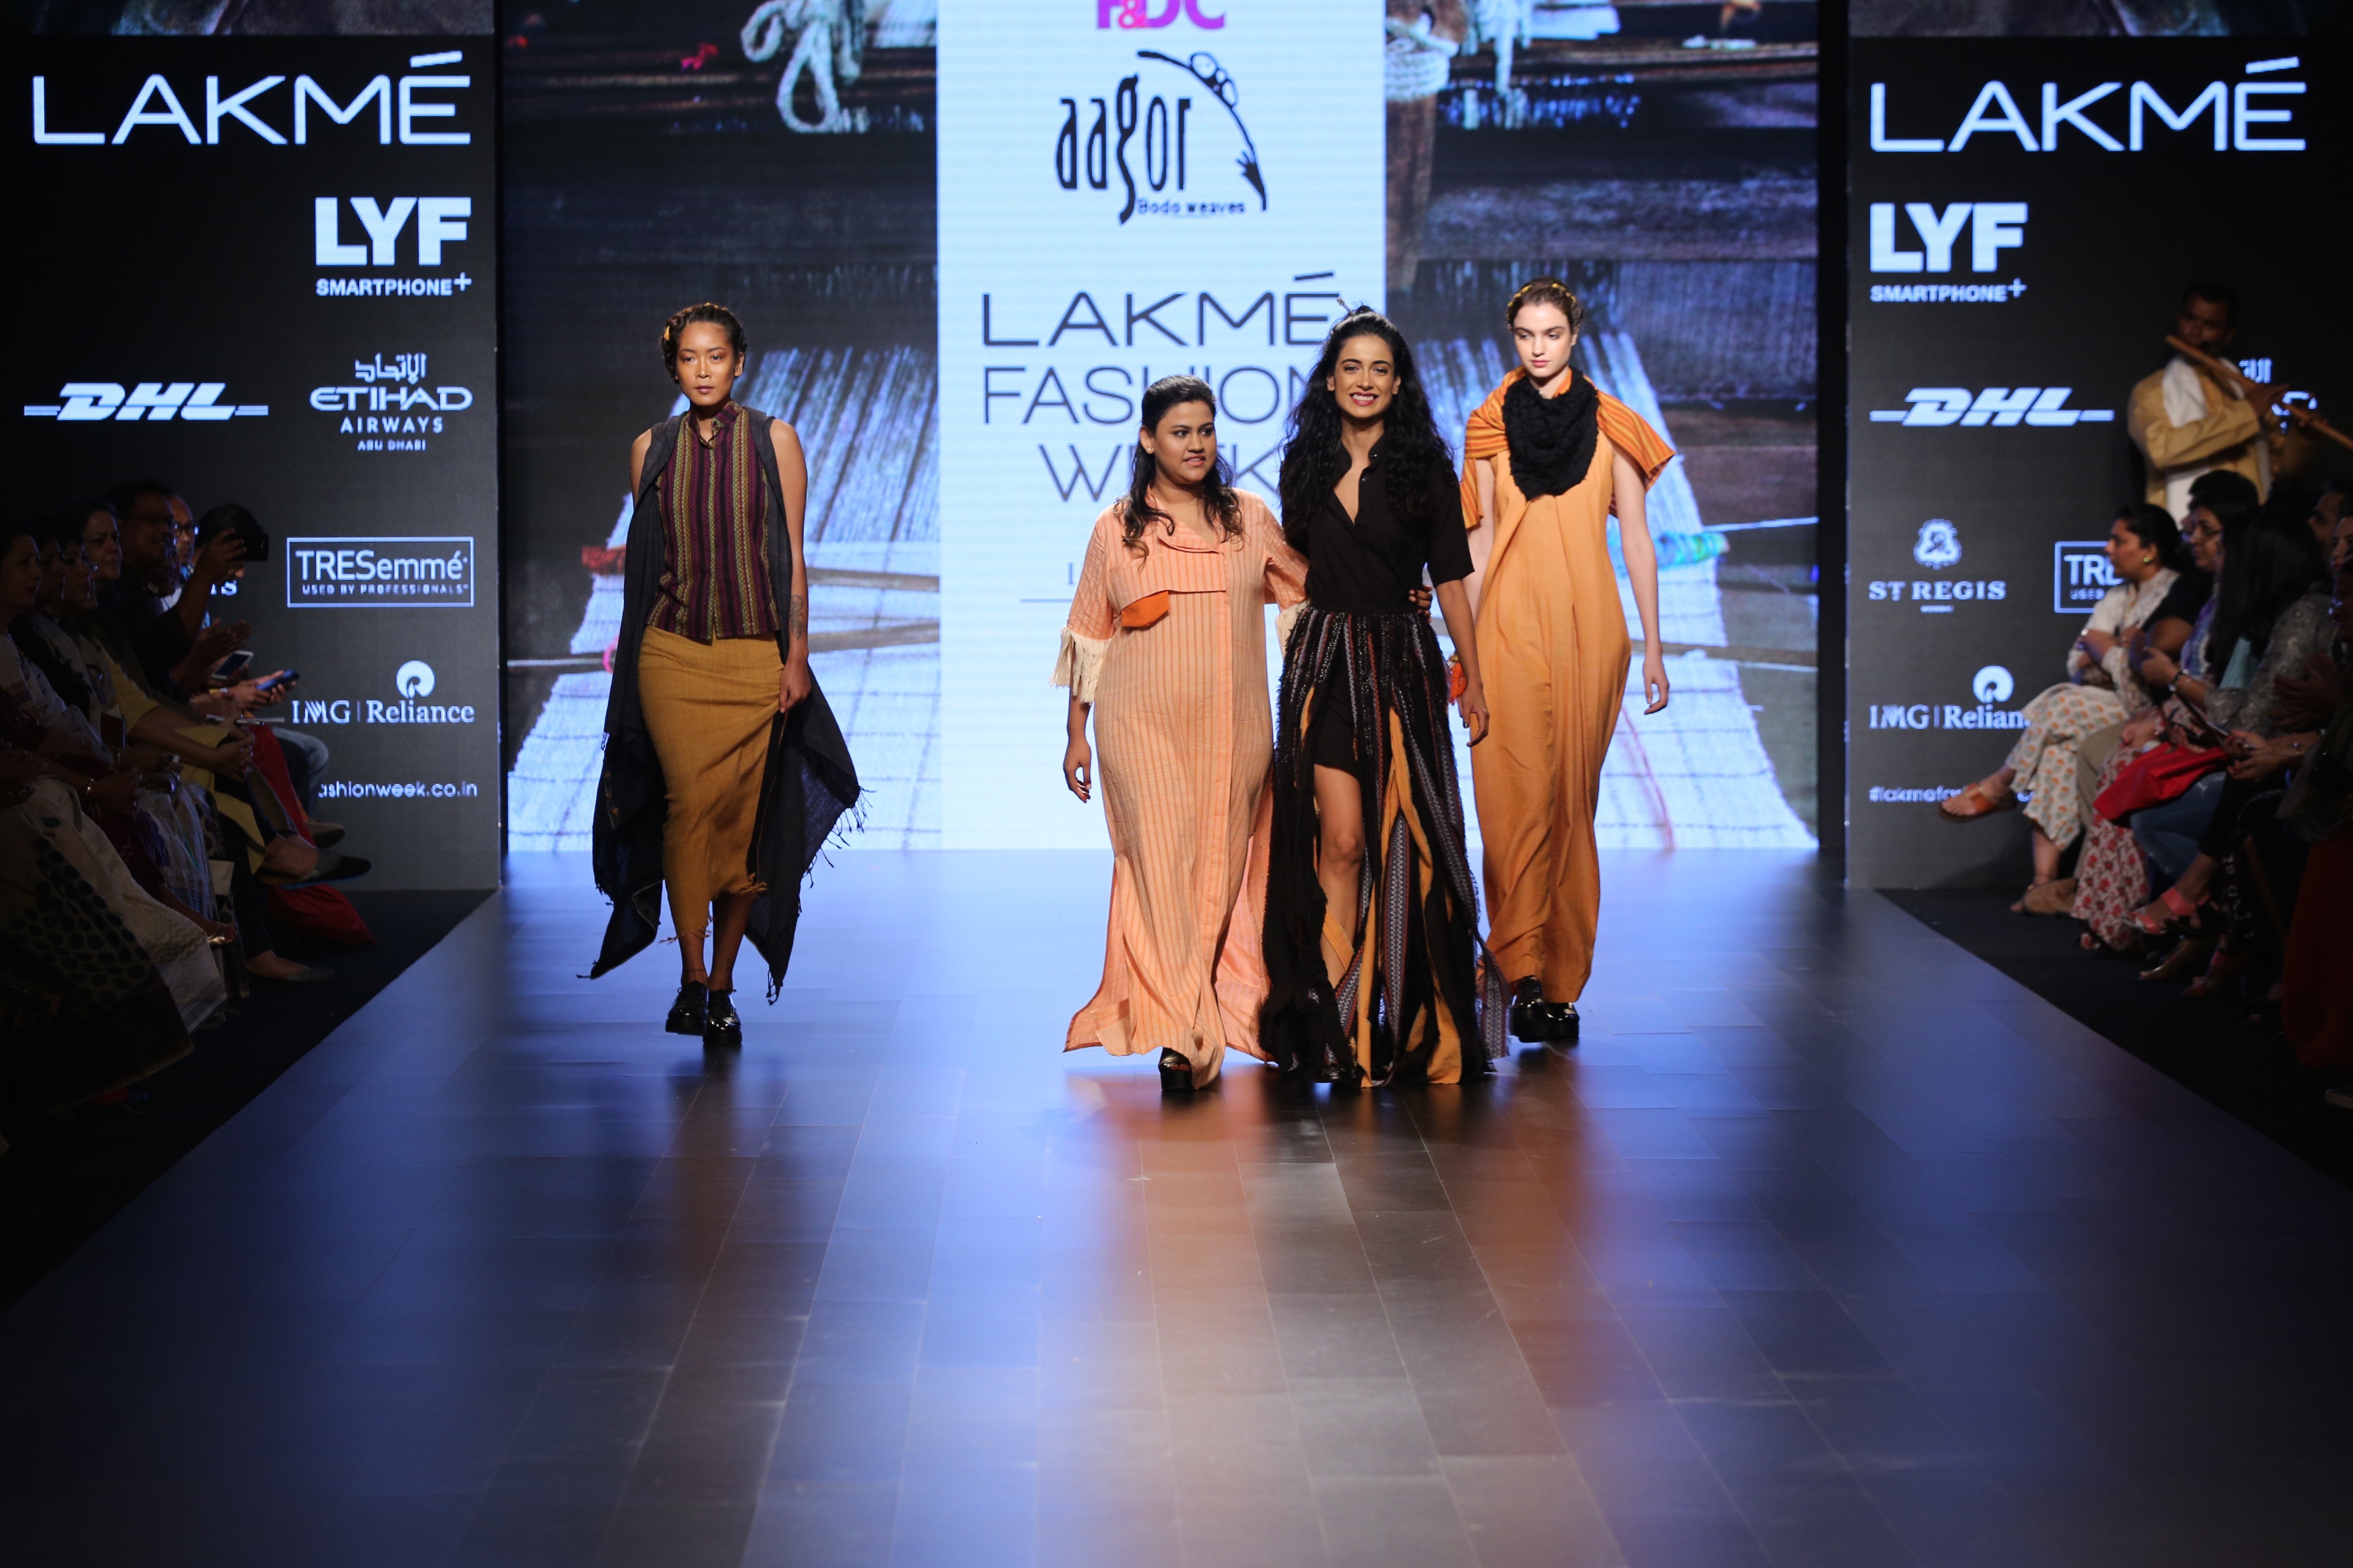 The designs that were showcased at Lakme Fashion Week. Image Credit: 'The Ant'